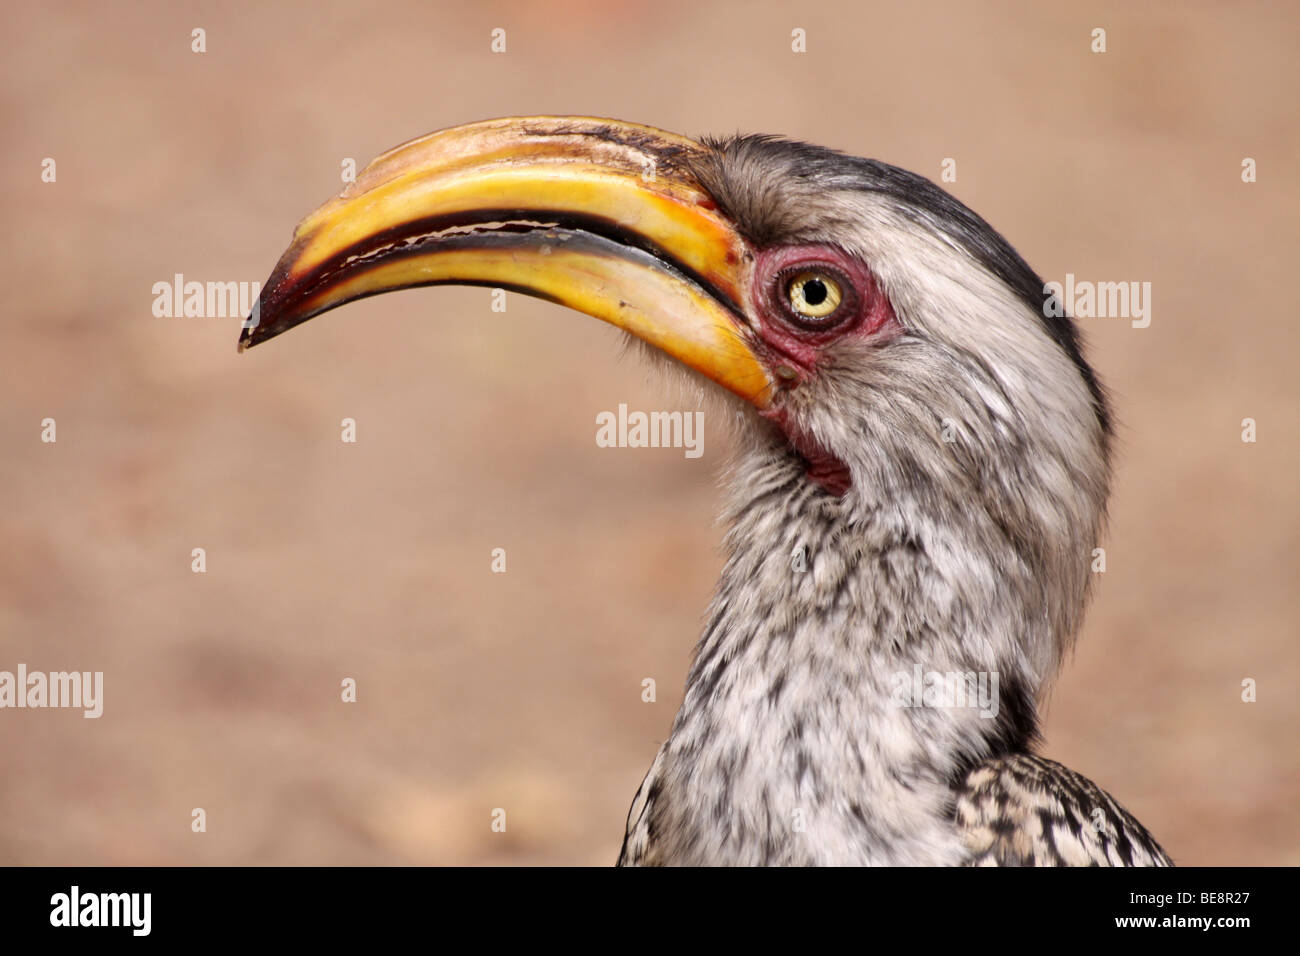 Head And Beak Of Southern Yellow-billed Hornbill Tockus leucomelas In Kruger National Park, South Africa Stock Photo